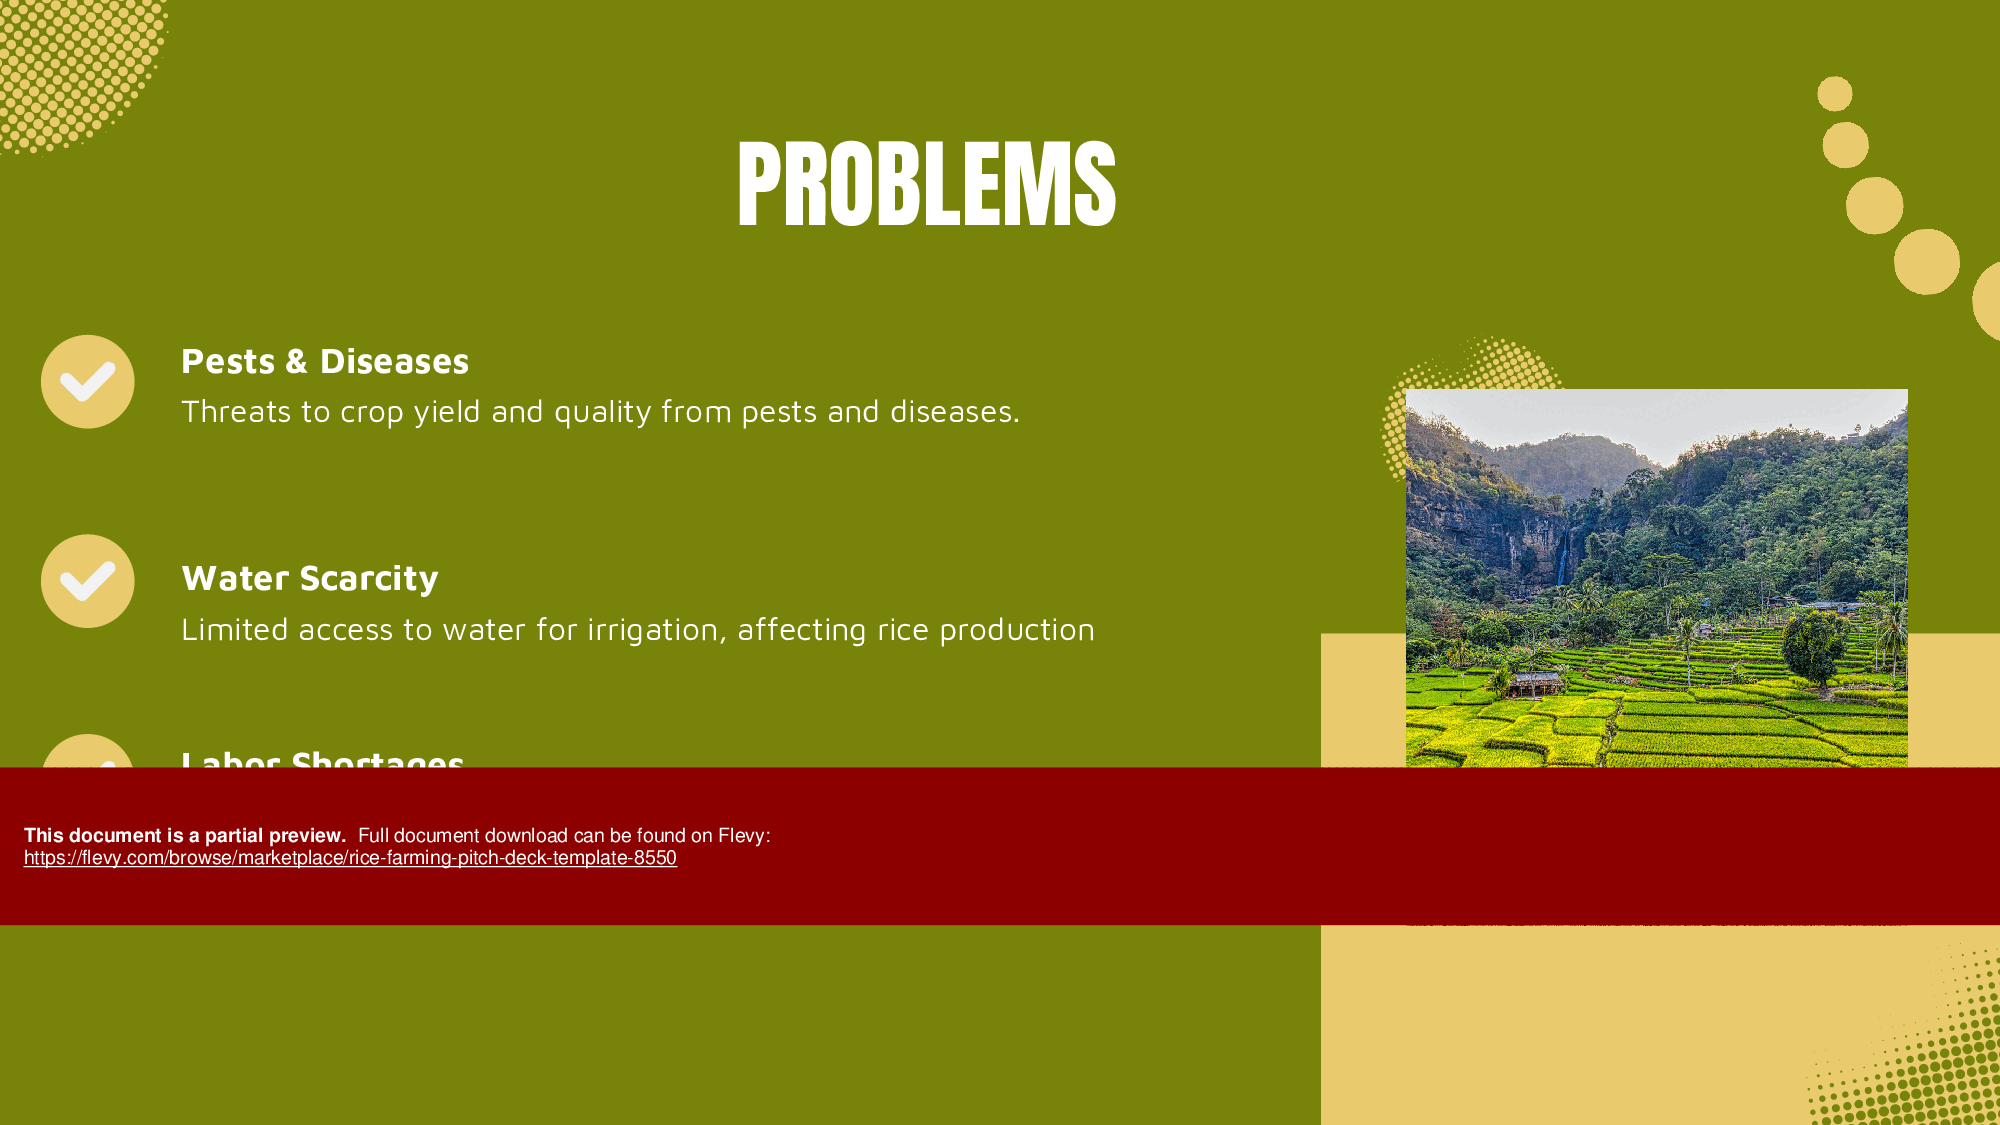 Rice Farming Pitch Deck Template (37-page PDF document) Preview Image